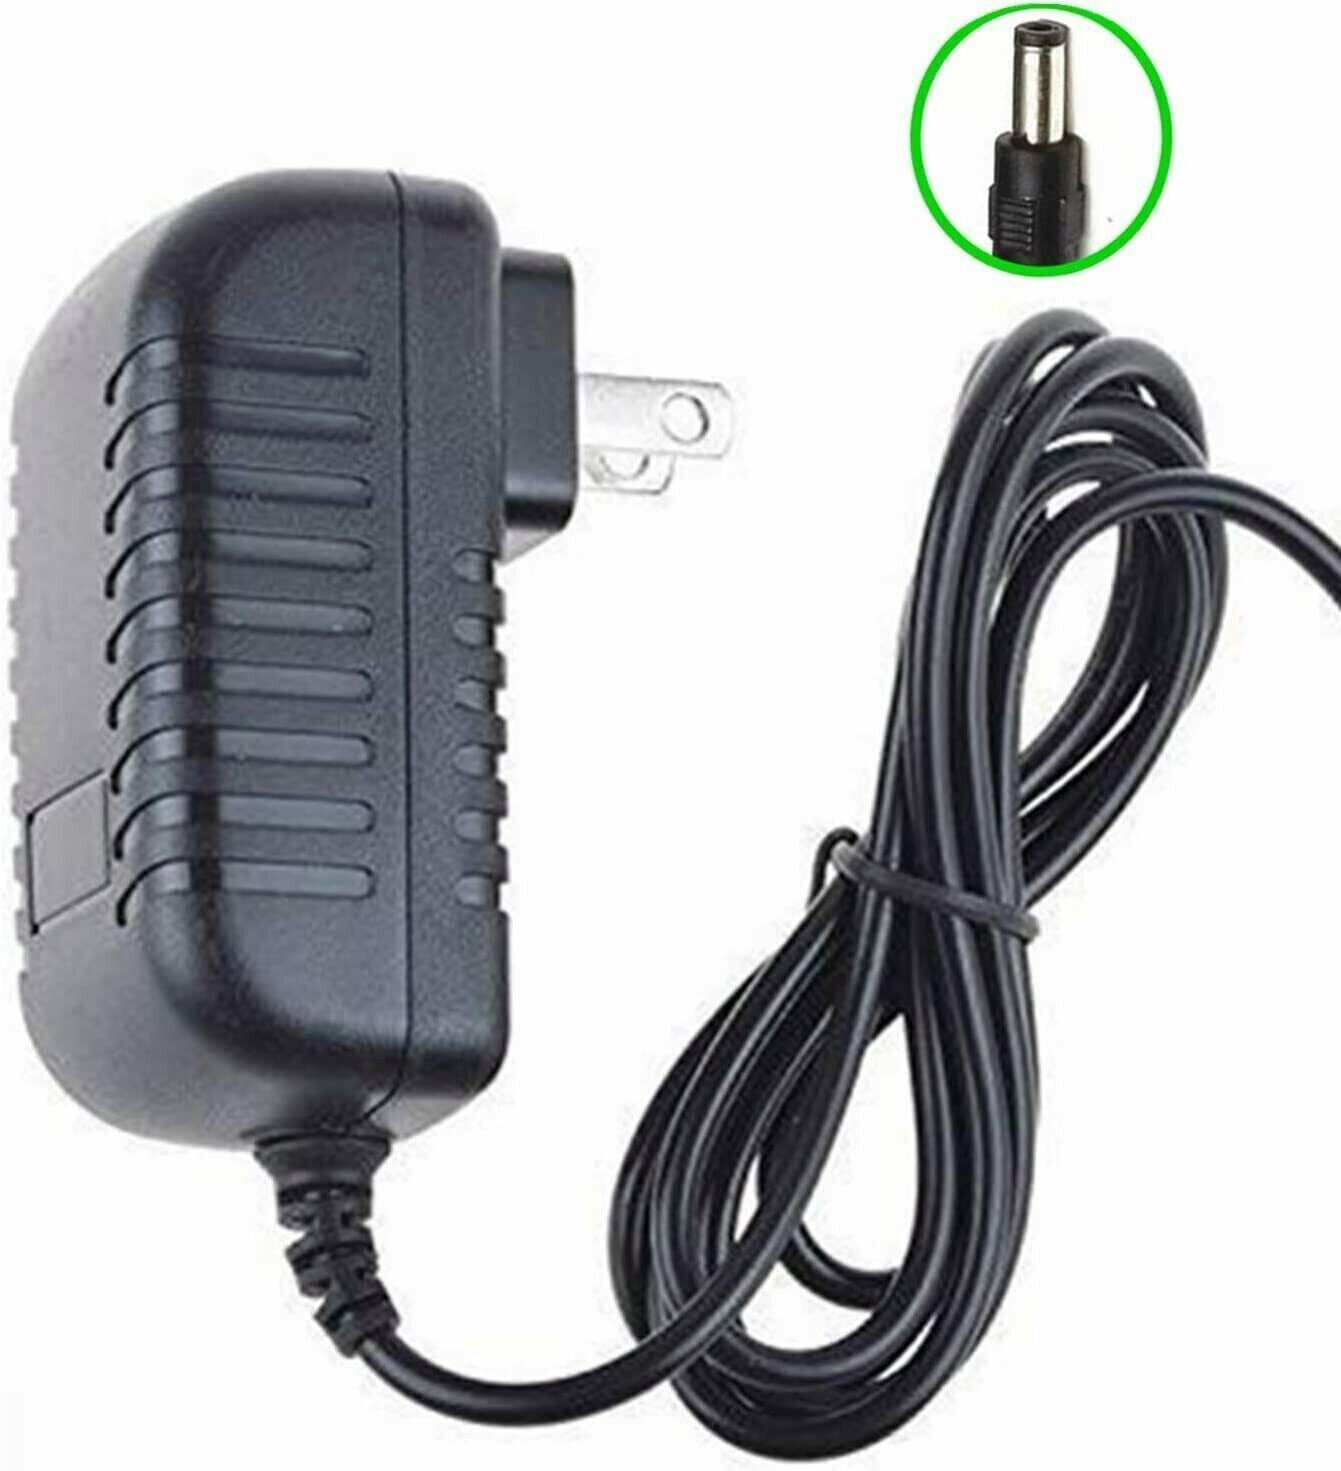 US 18V Power Adaptor for the Black and Decker KC1462F Drill by myVolts